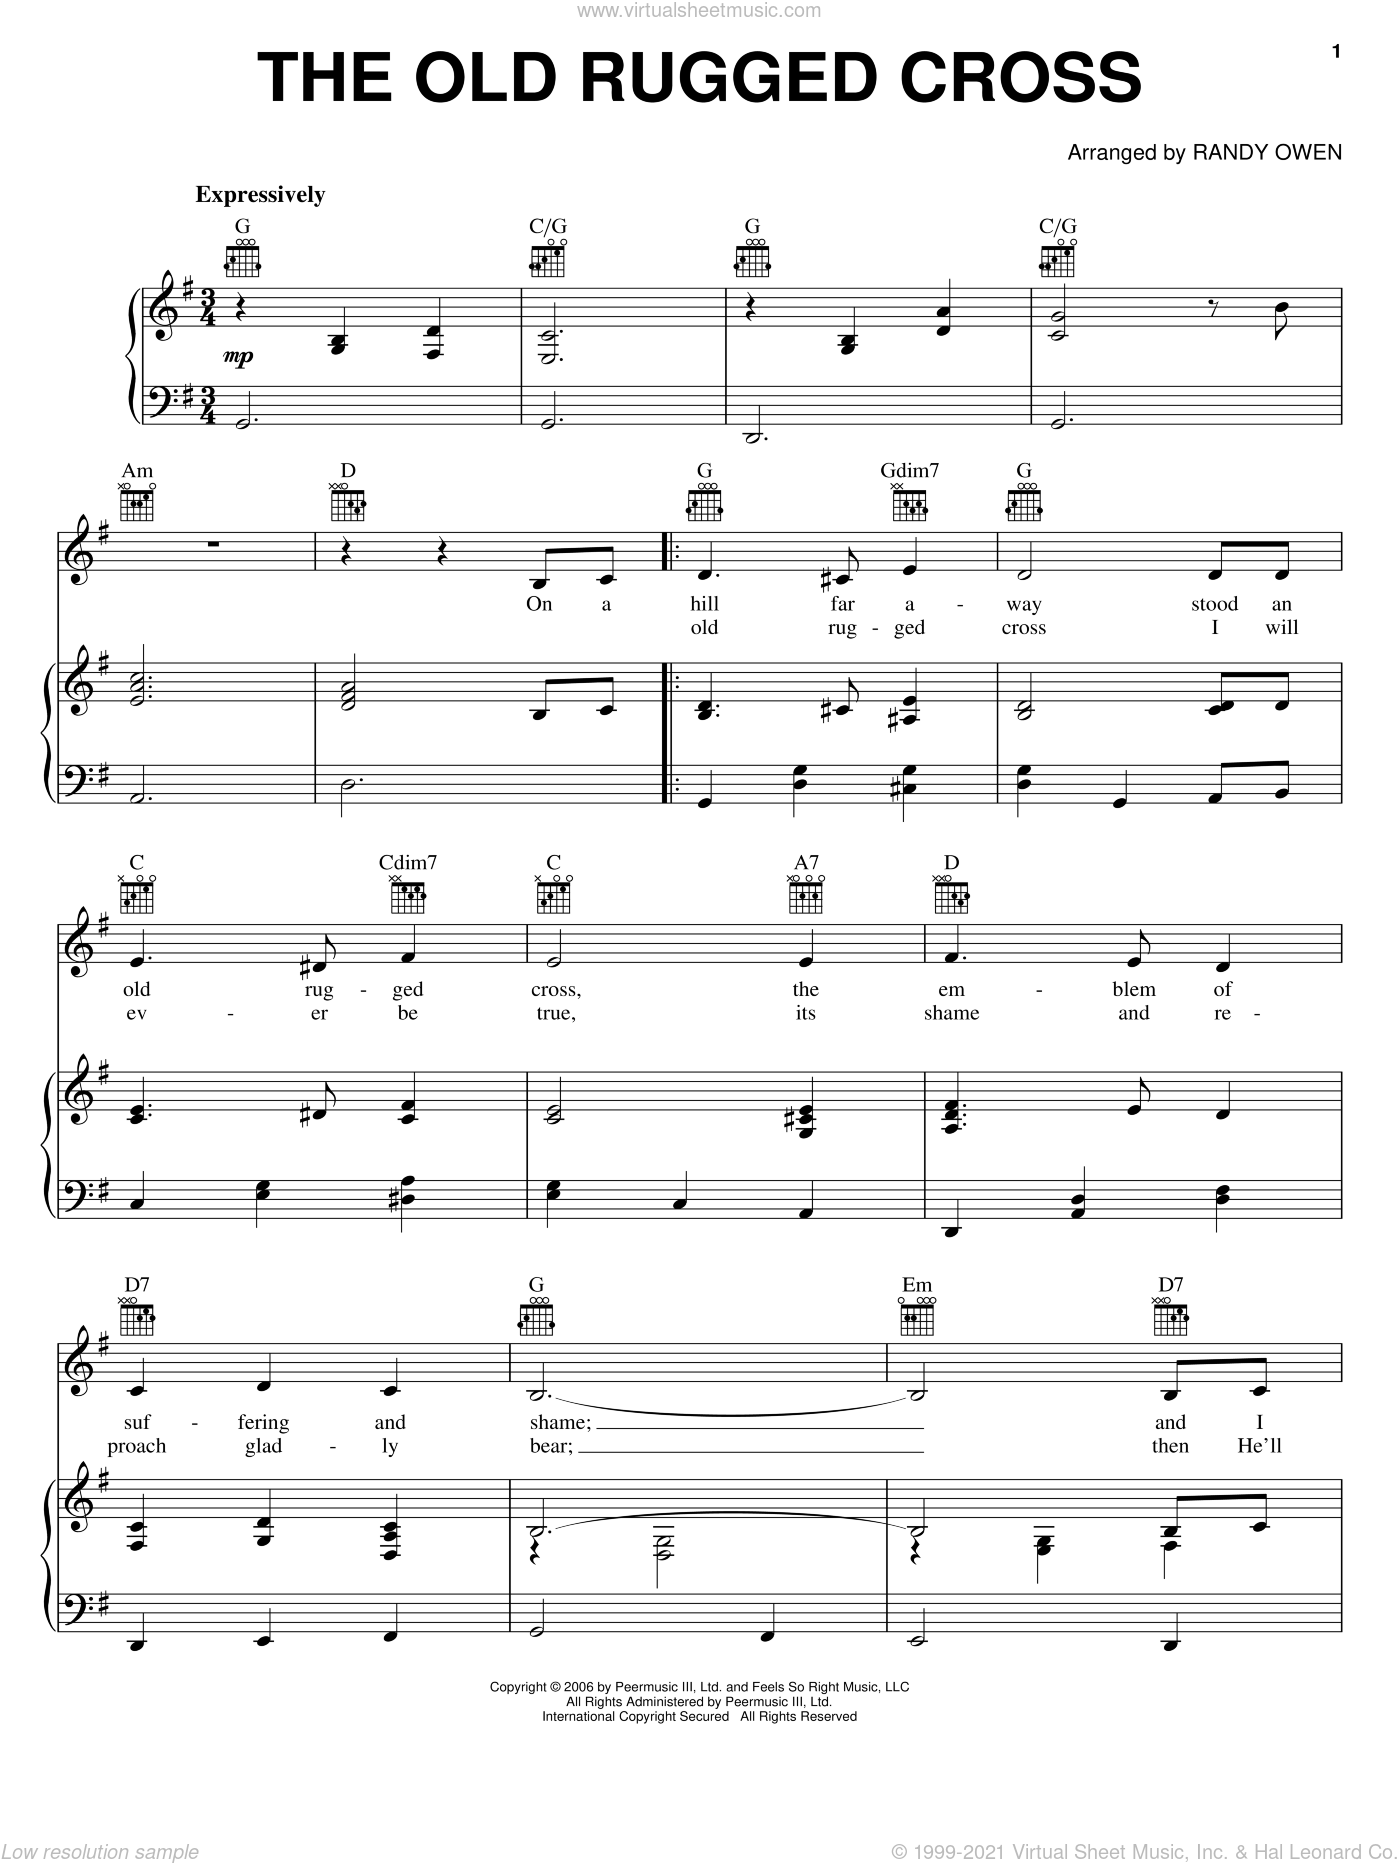 Alabama - The Old Rugged Cross sheet music for voice, piano or guitar